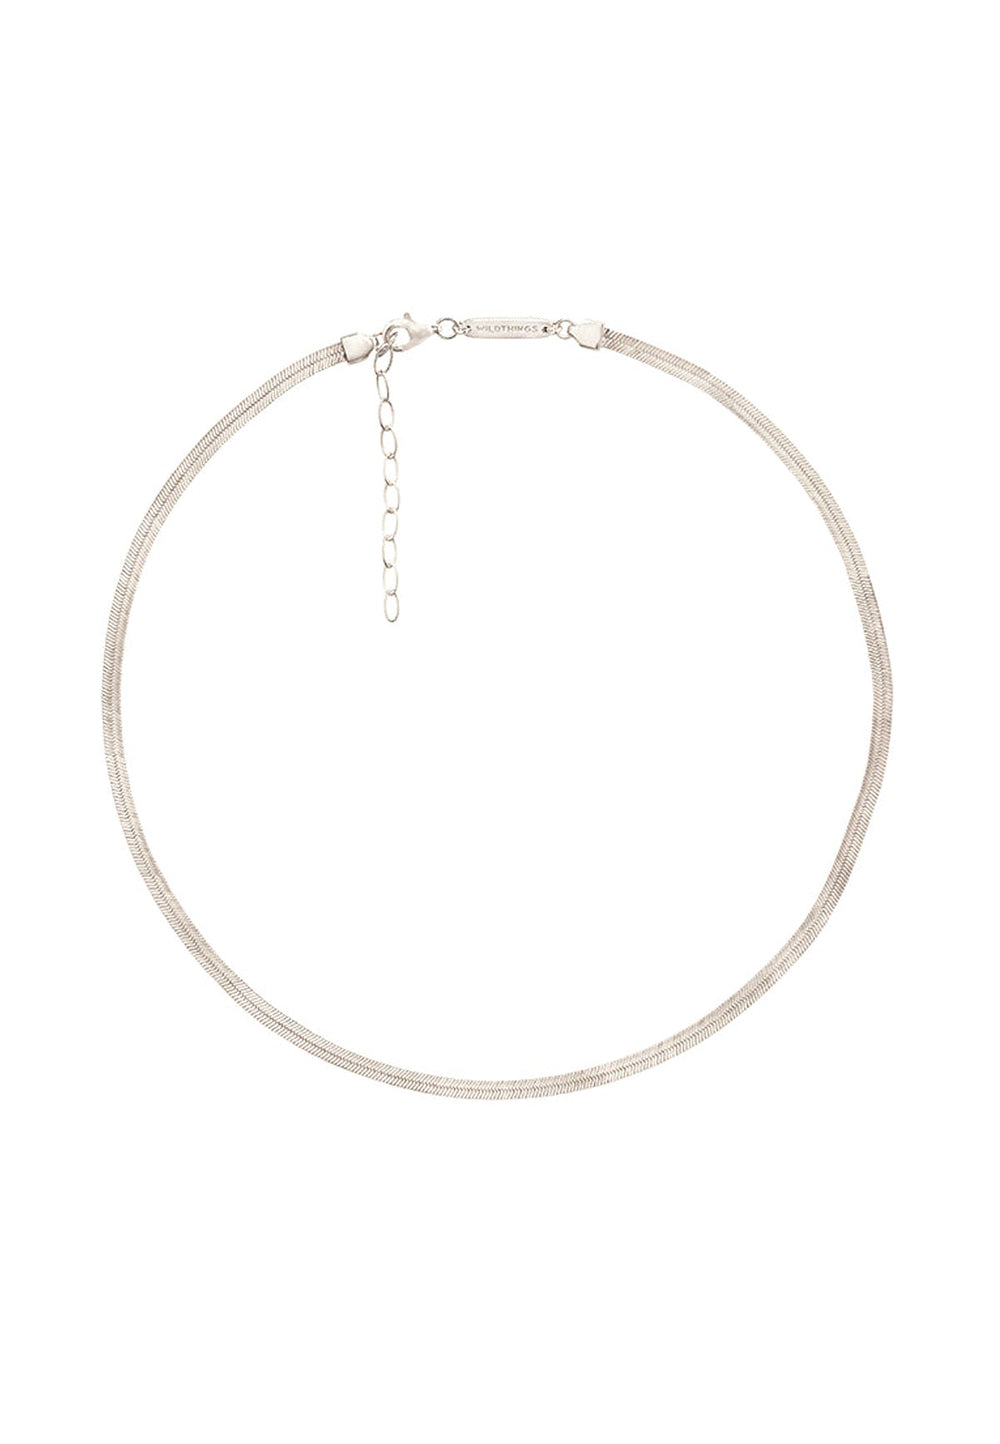 SNAKE CHAIN NECKLACE SILVER - Moeon